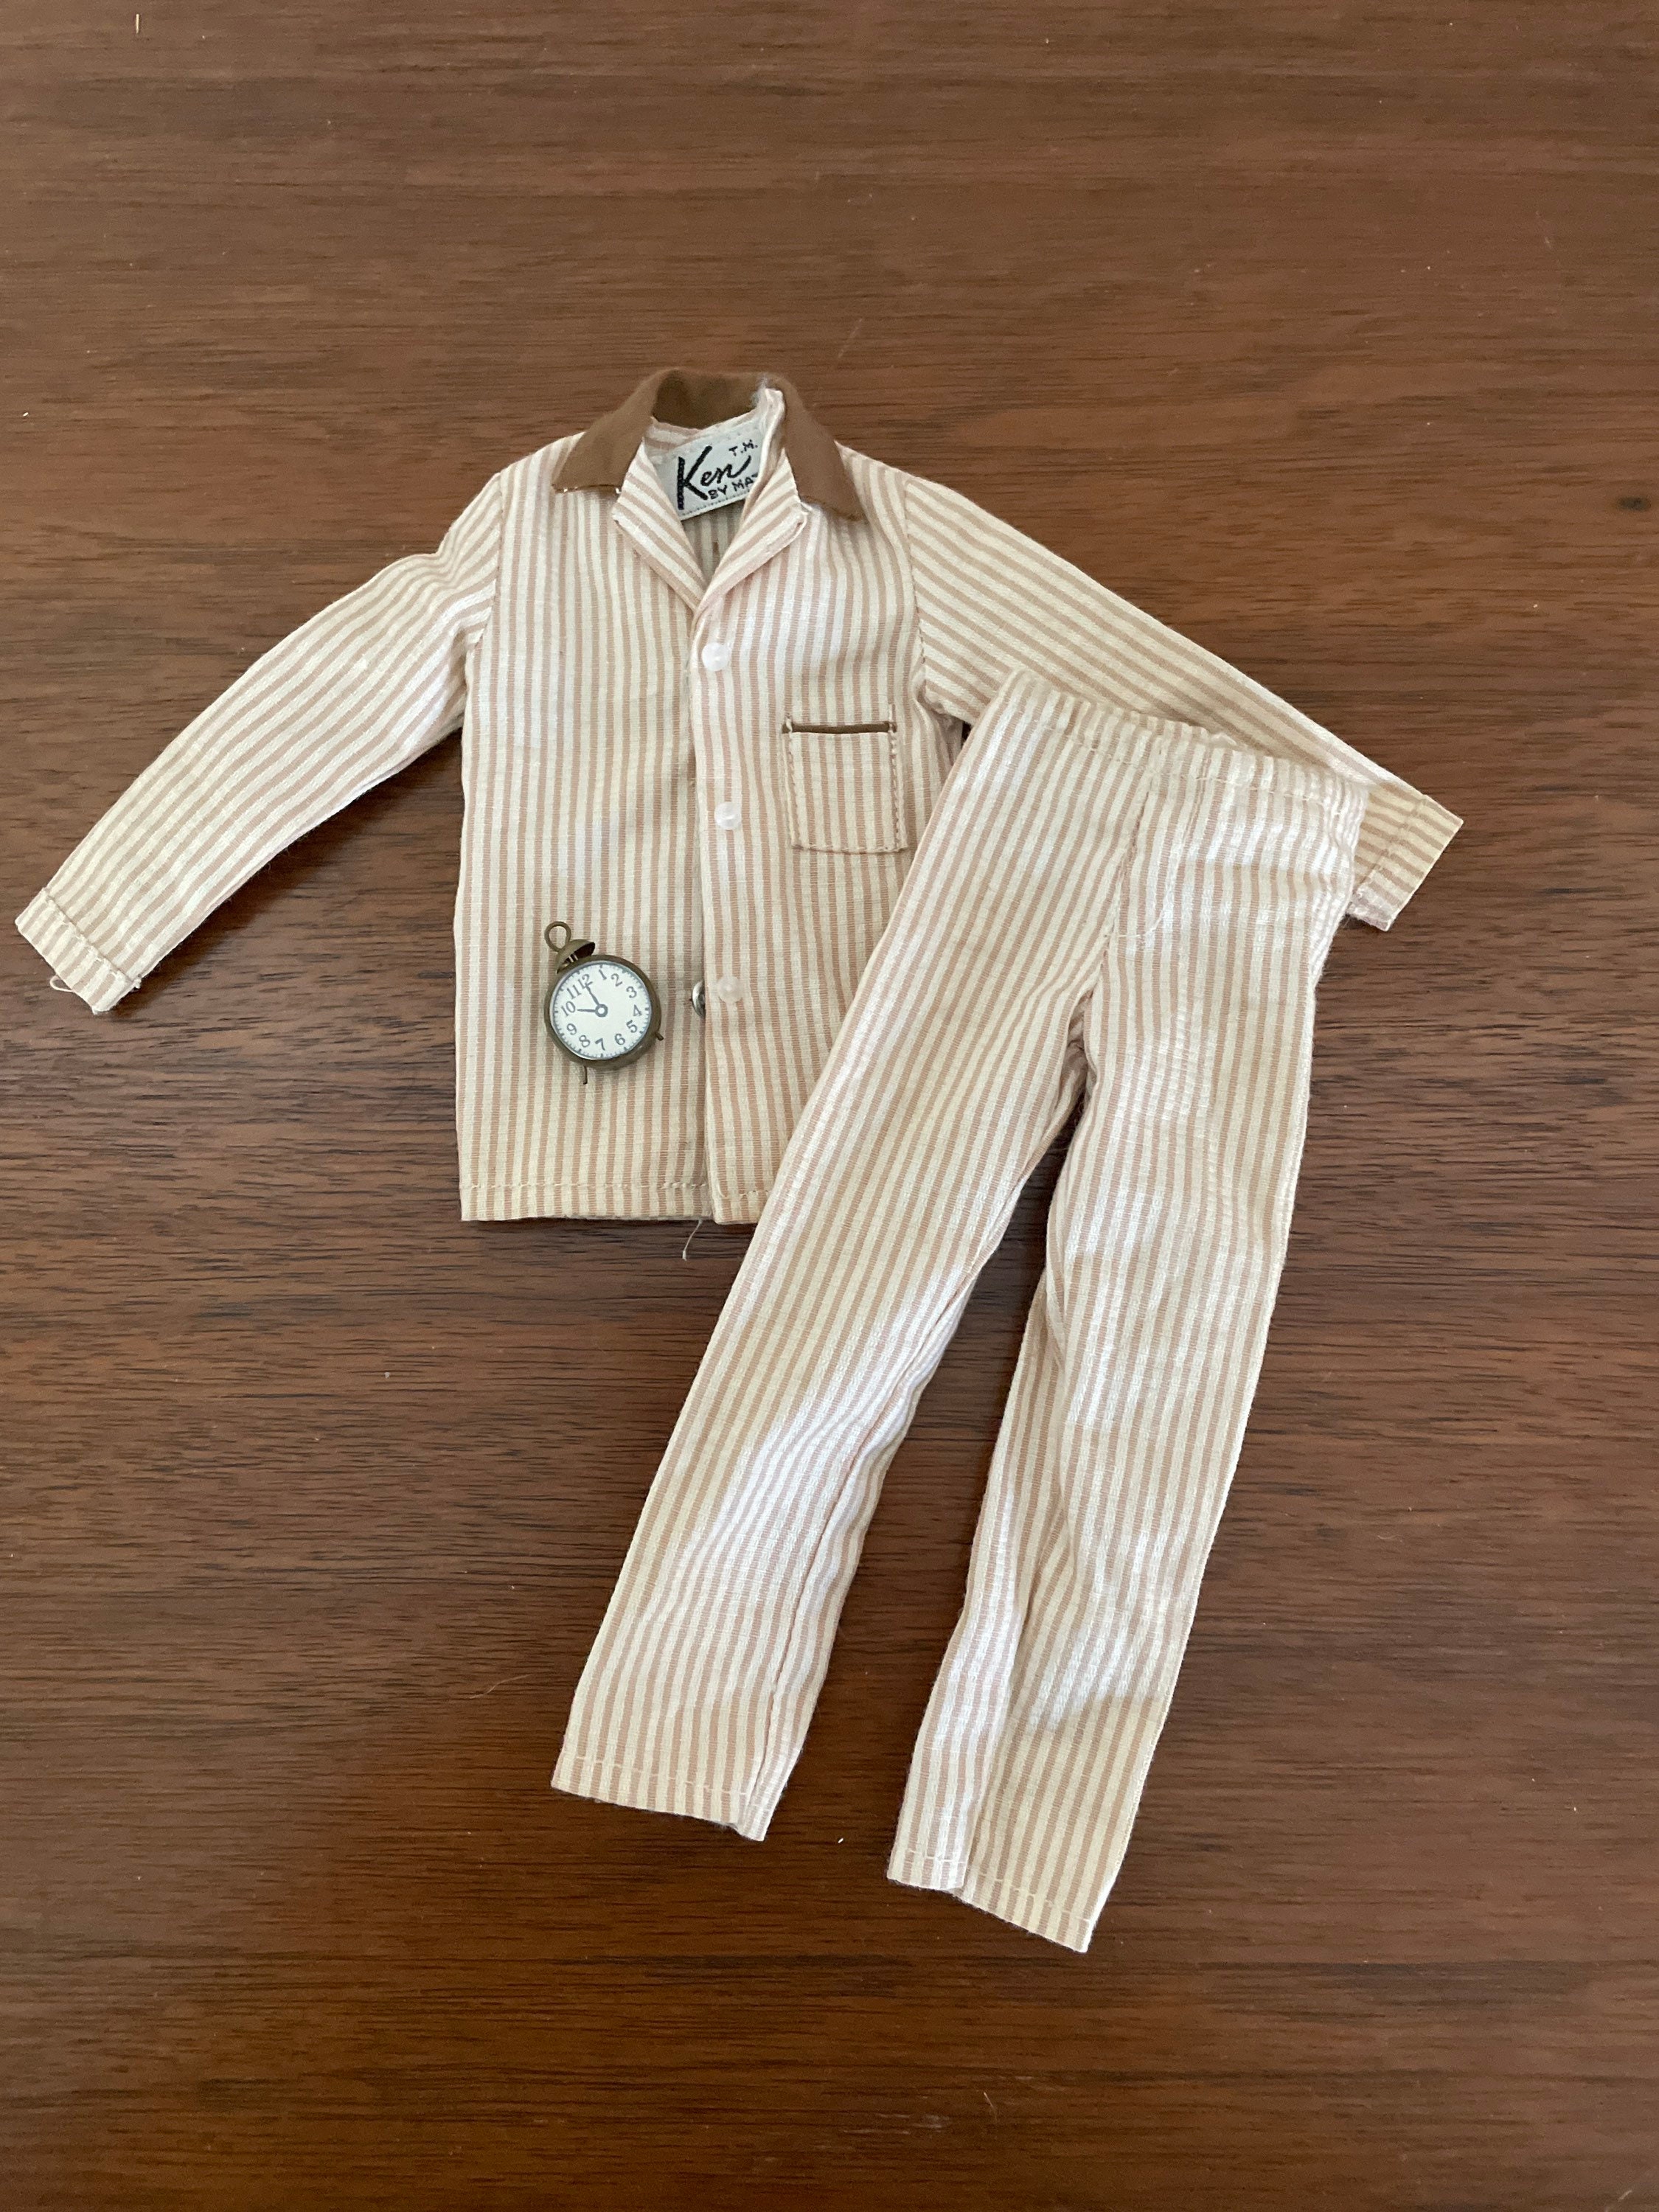 Male Fashion Doll Clothes Ken not included Handmade Vintage Style Flannel Pajamas with Snaps for 12 dolls the size of Ken Toy Gift